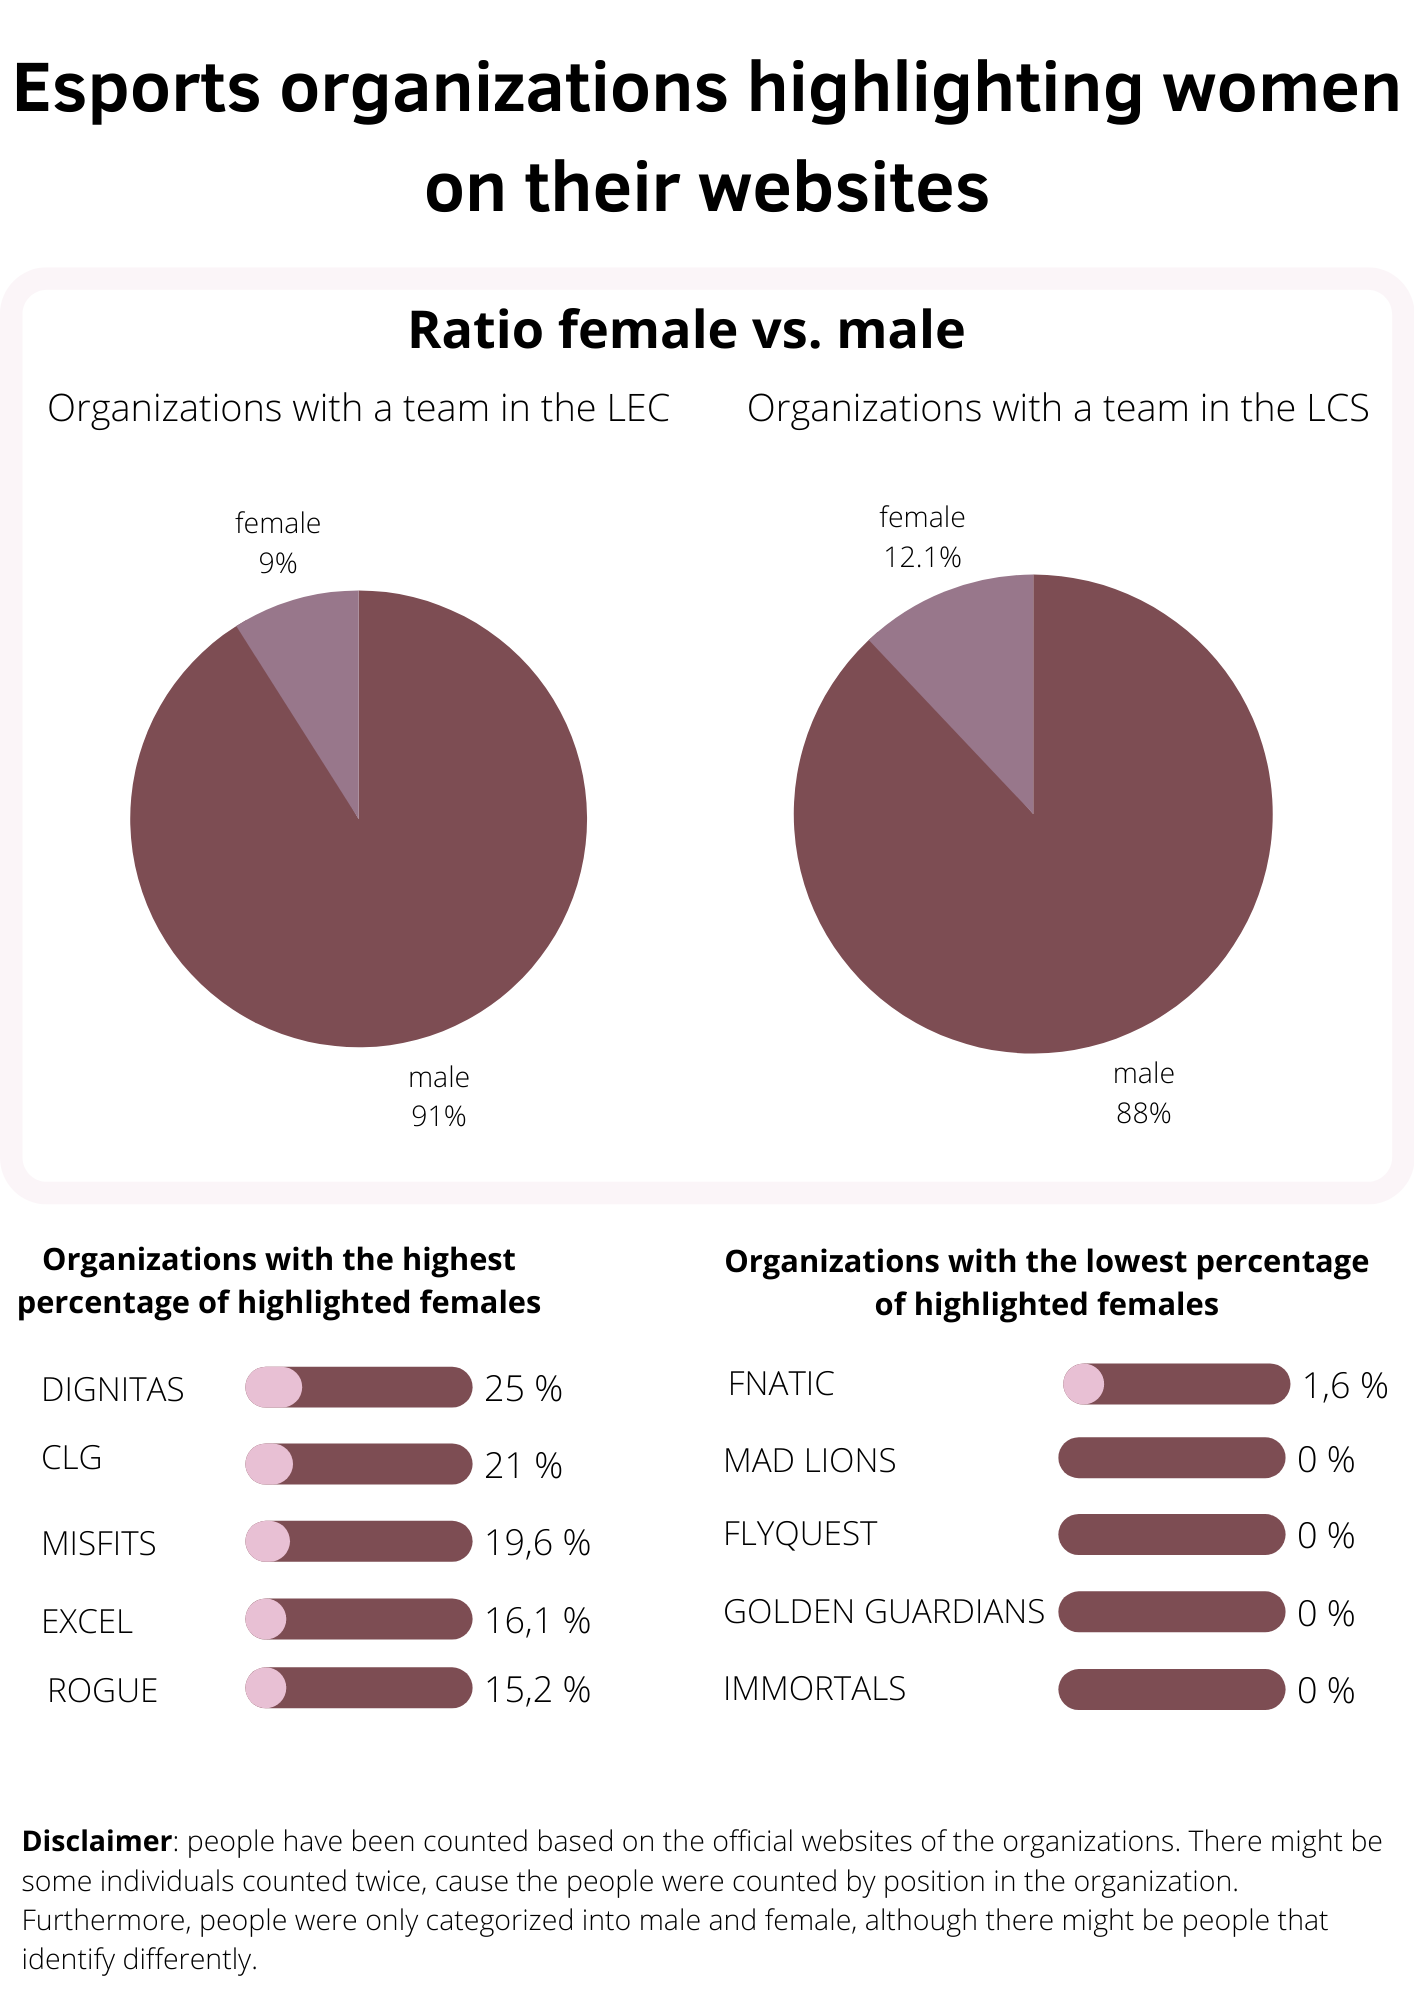 Displaying how little women are displayed on websites of League of Legends teams (9% for teams in the LEC, 12% for the LCS)